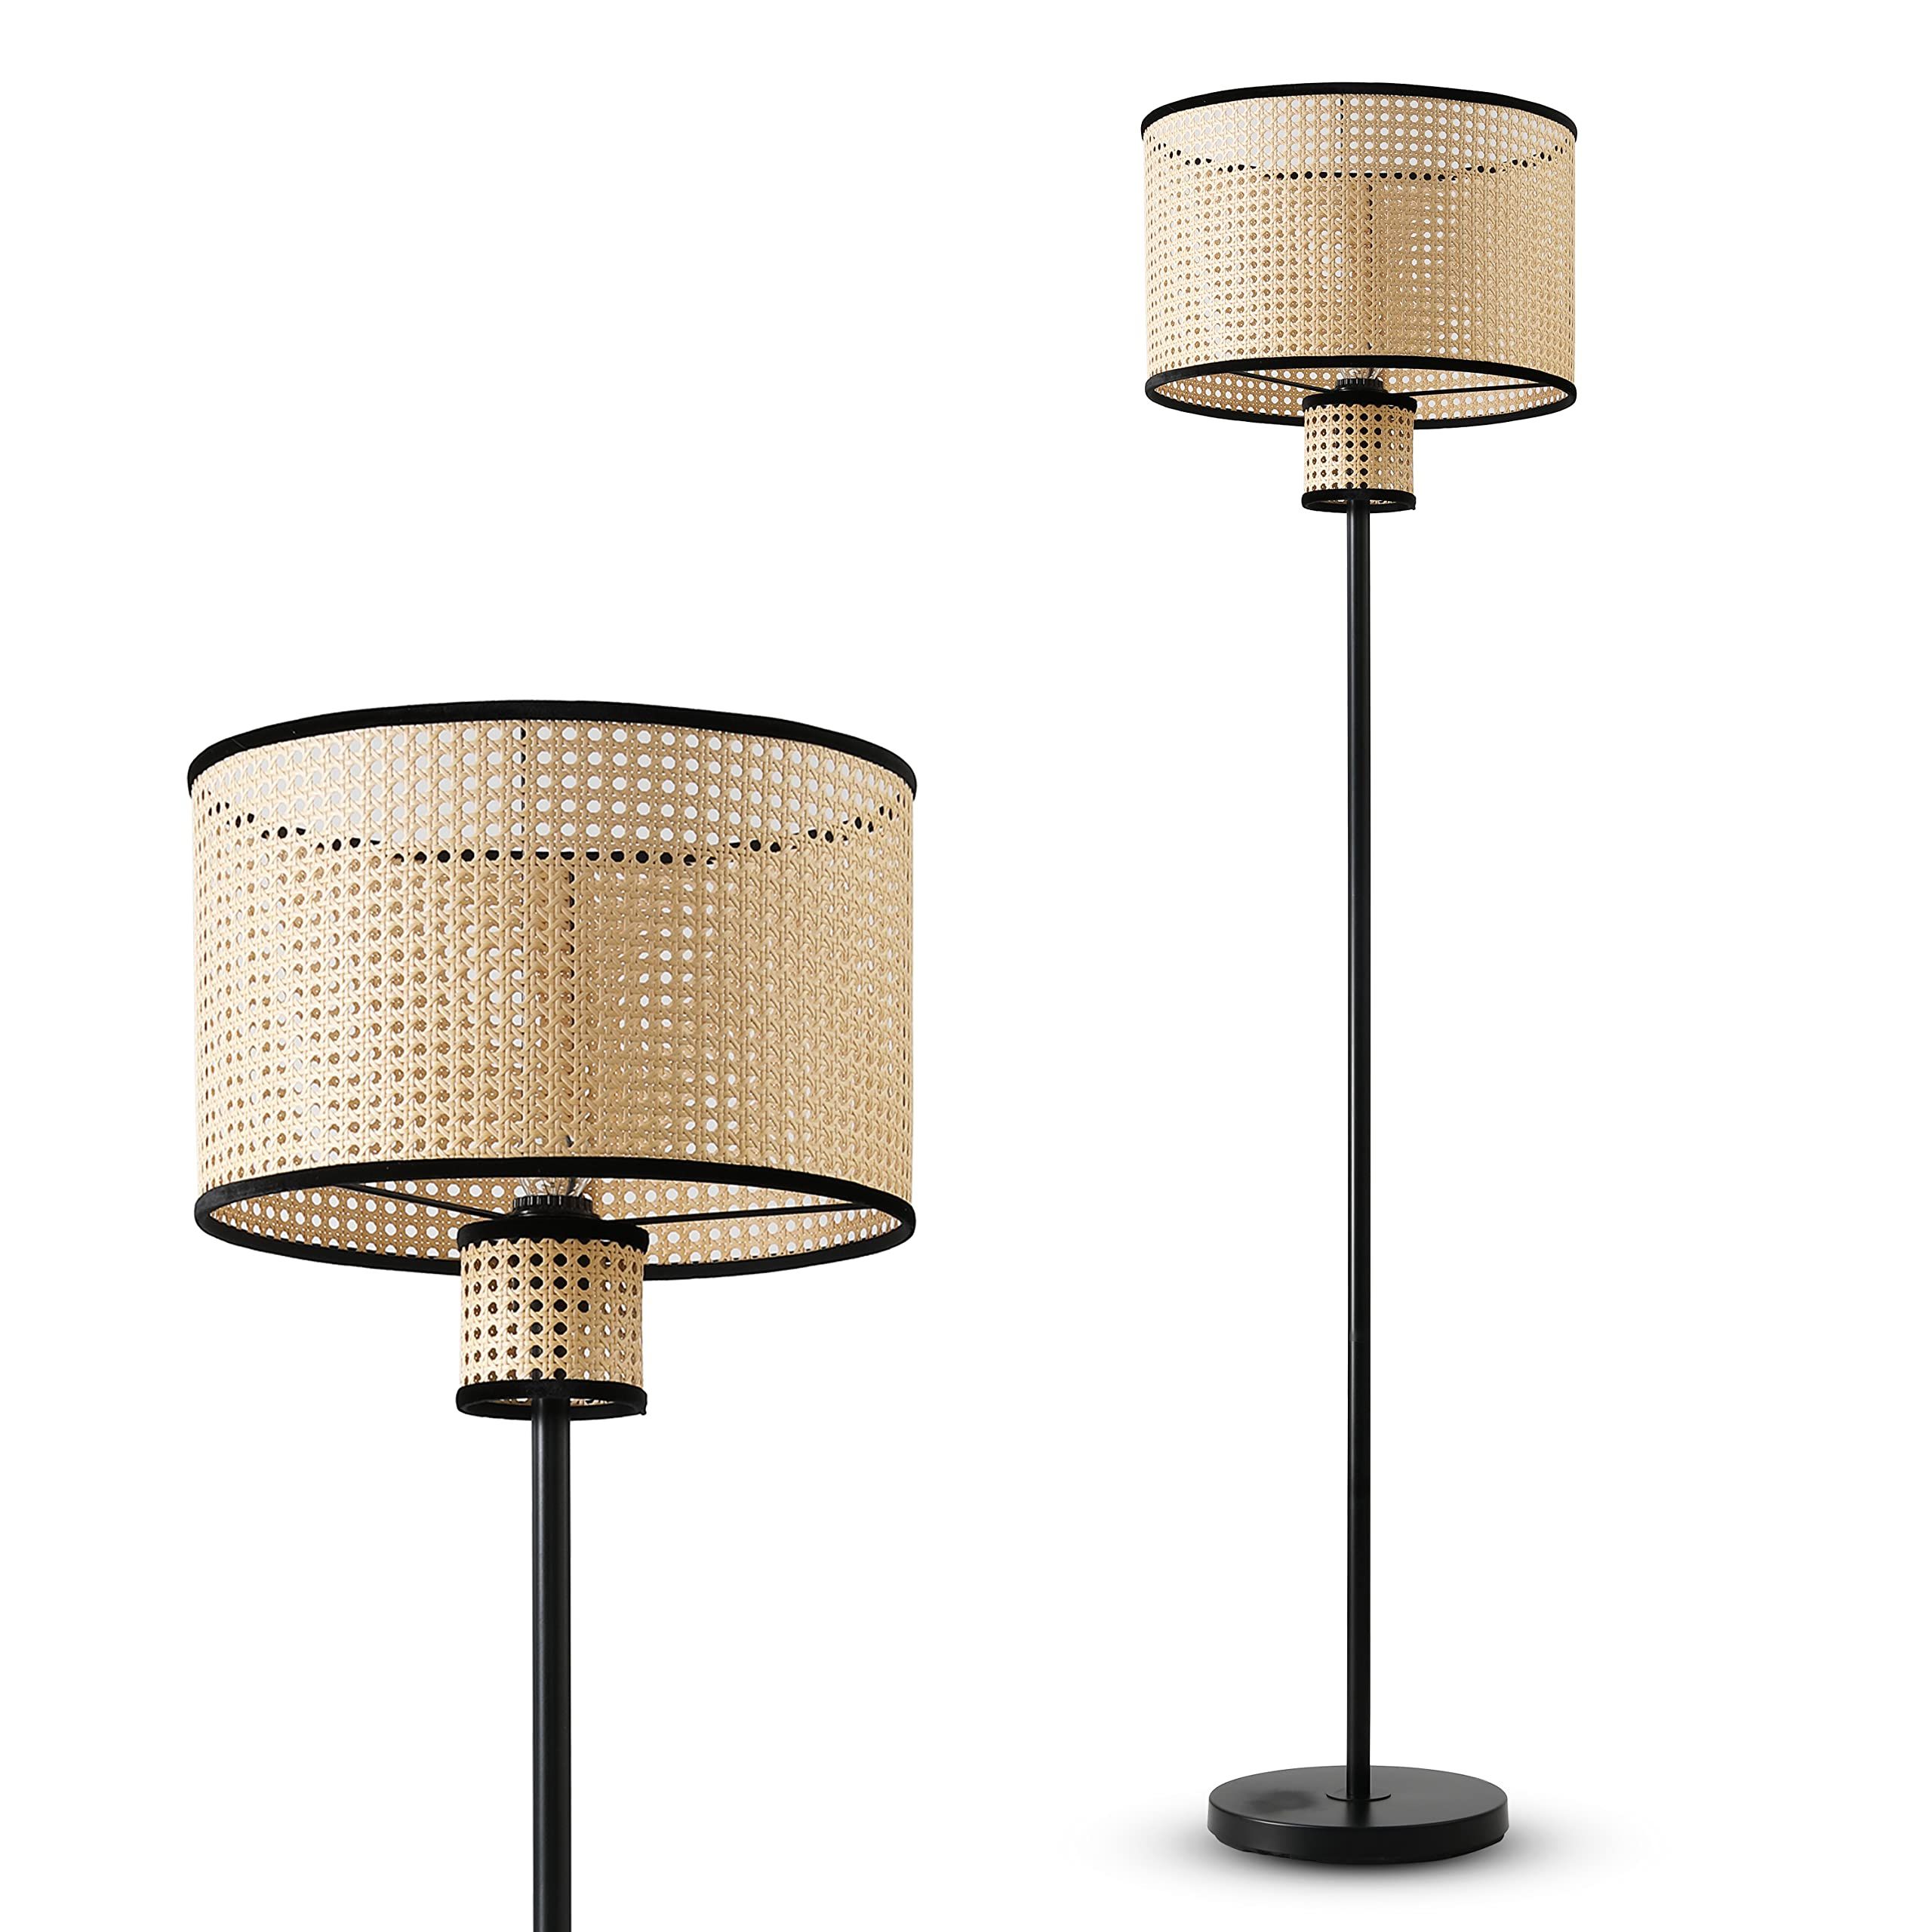 Standing Lamps With 2 Tier Table Pertaining To 2019 Vidalite Nakuv – Modern Bohemian Floor Lamp With 2 Tier Pvc Rattan Shade  And Velvet Stiched Rim For Foyer, Kitchen Living Room, Bedroom, Beige (View 8 of 10)